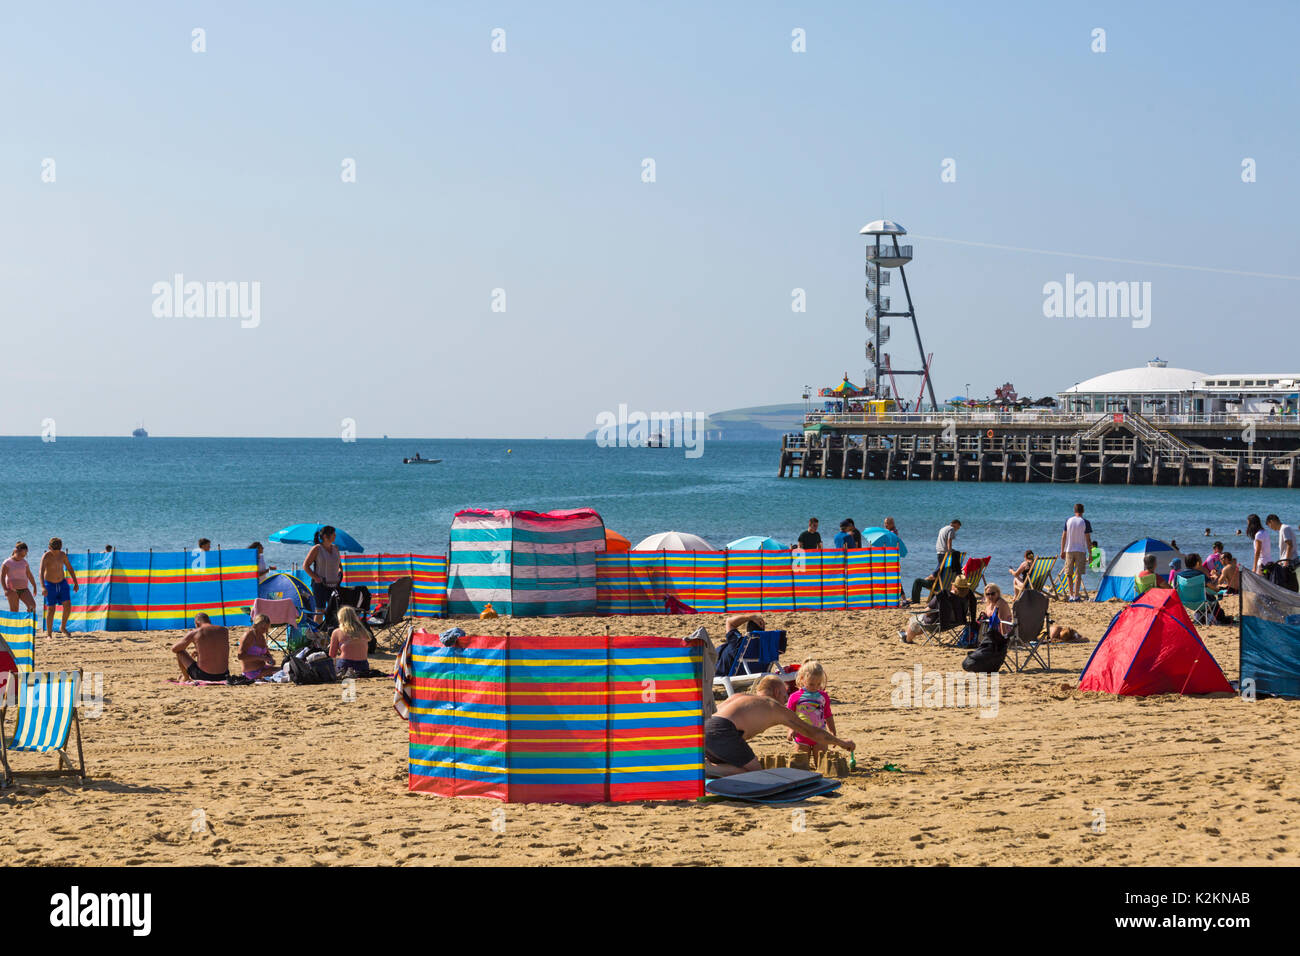 Bournemouth, Dorset, UK. 1st Sep, 2017. UK weather: lovely warm sunny day at Bournemouth beach - visitors get there early to get a good spot for the second day of the Bournemouth Air Festival at the South Coast. Credit: Carolyn Jenkins/Alamy Live News Stock Photo